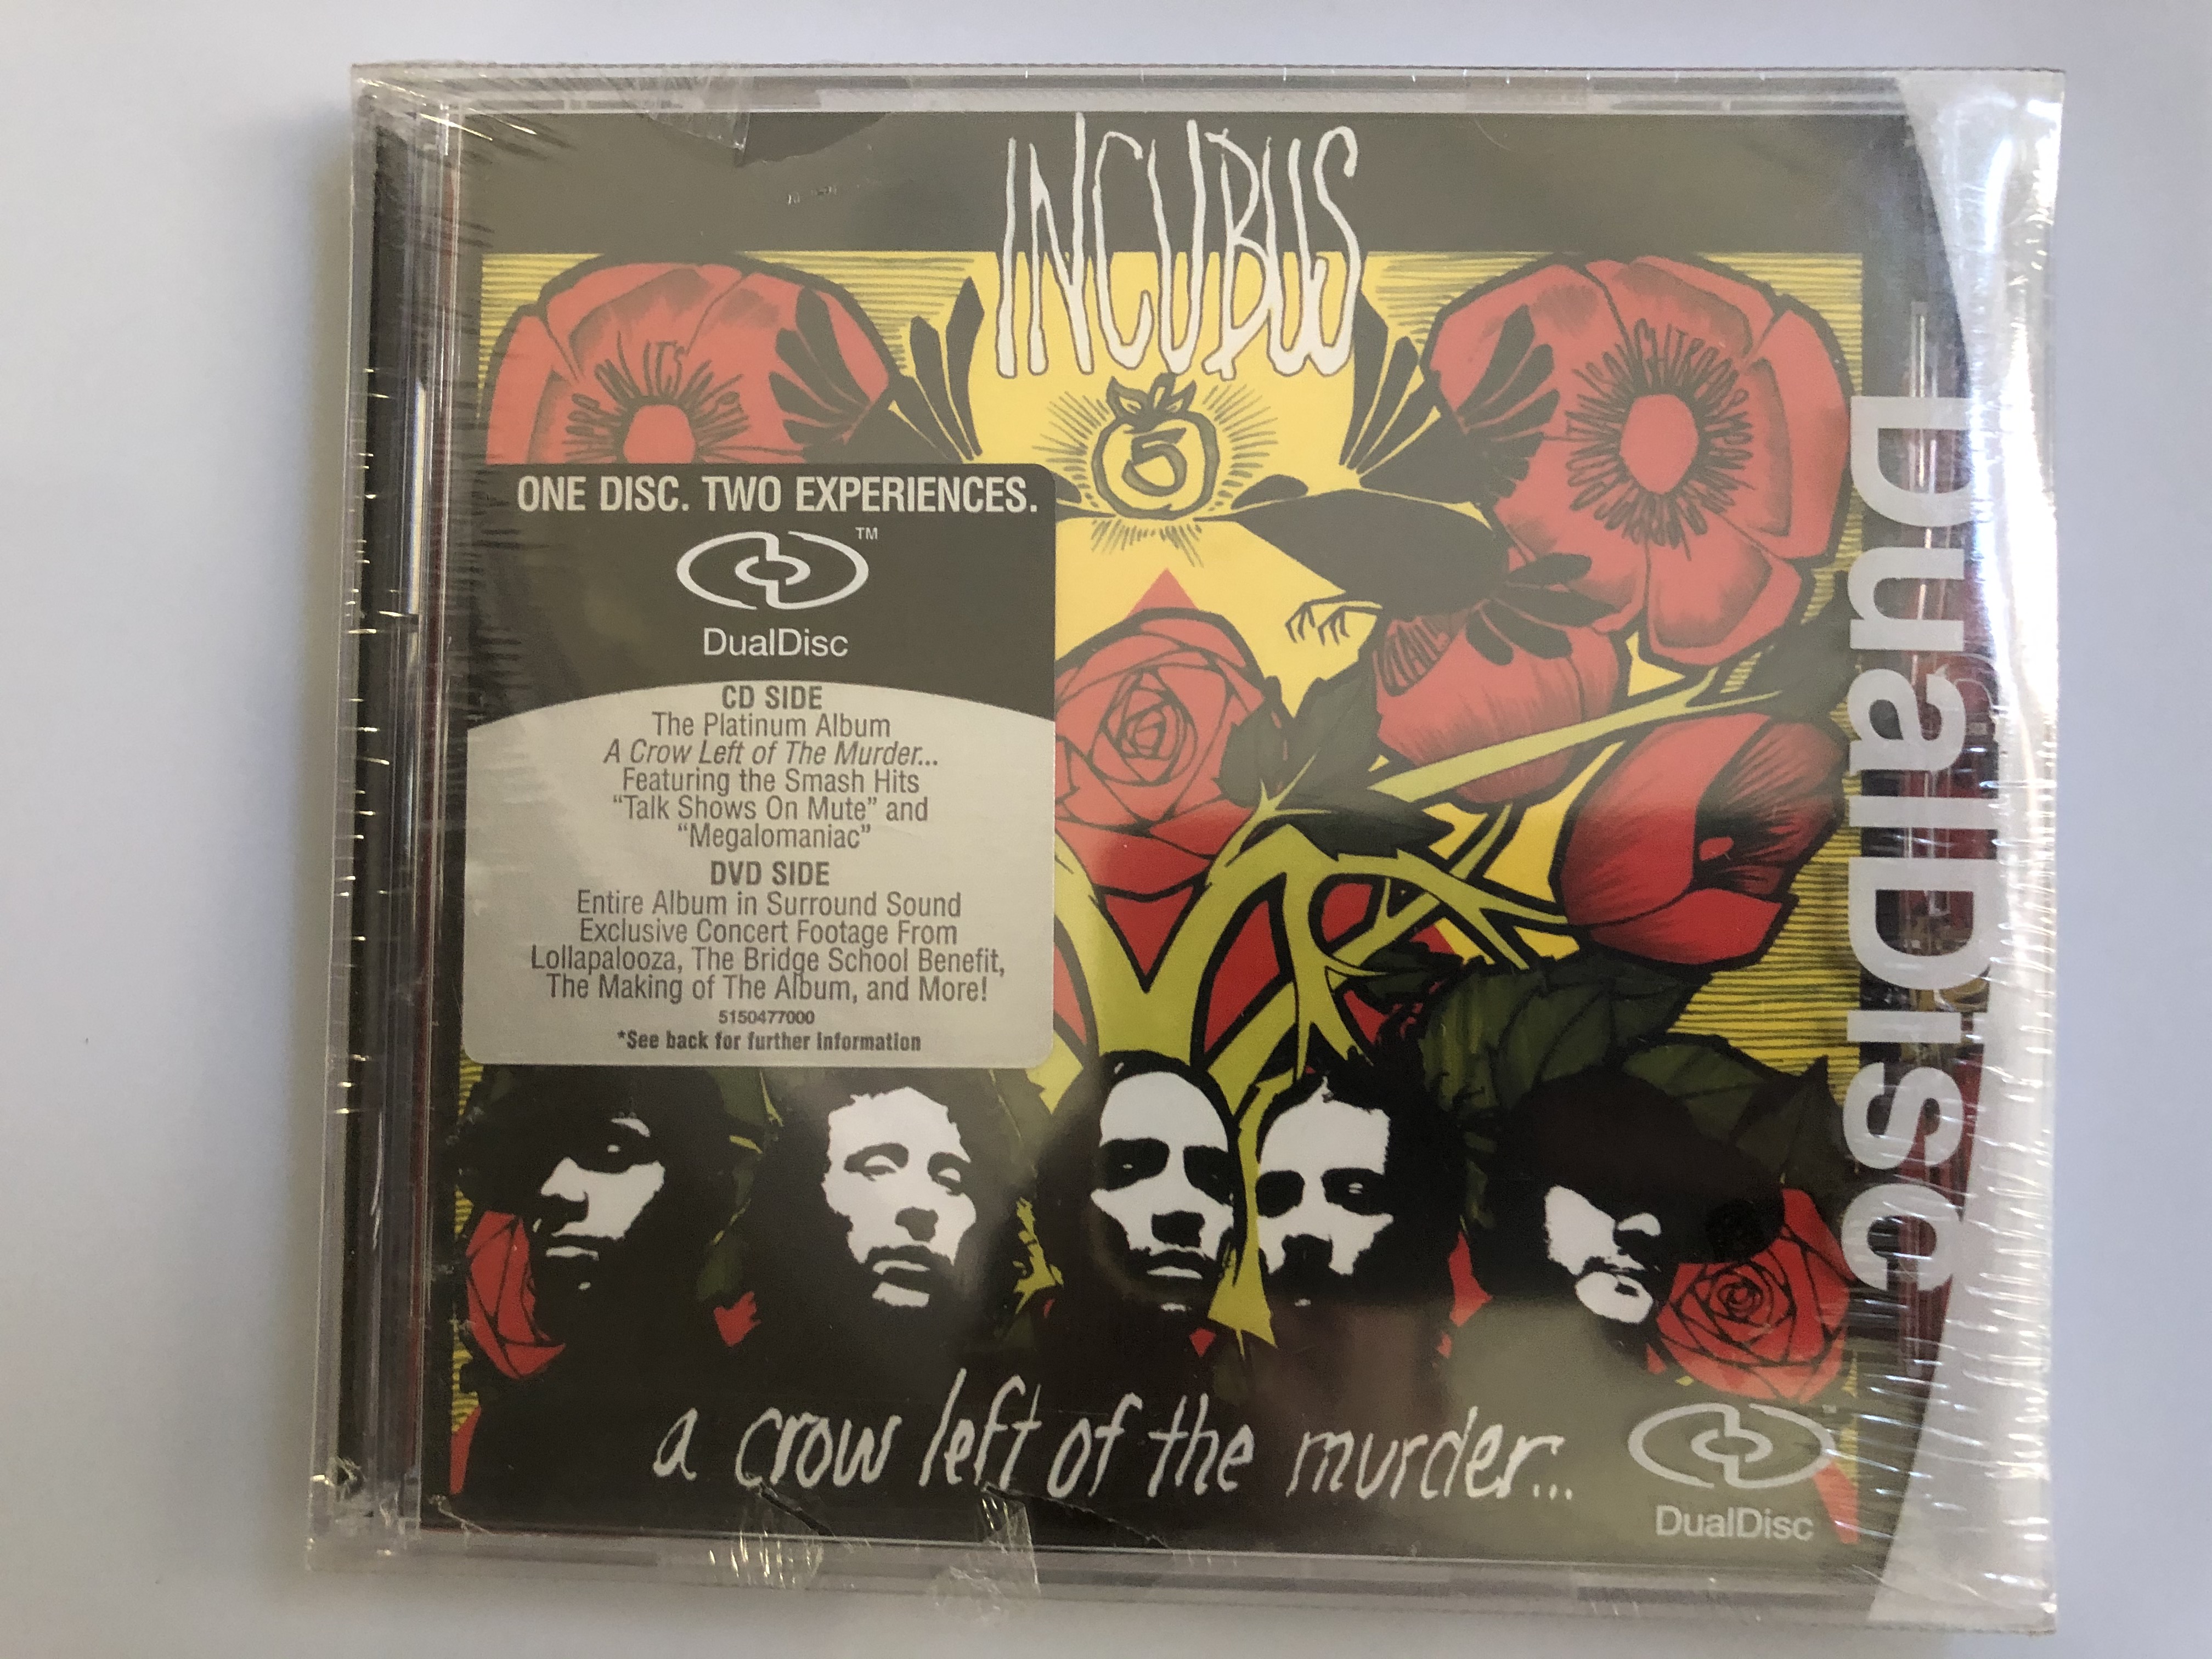 incubus-a-crow-left-of-the-murder...-one-disc-two-experiences-dual-disc-featuring-the-smash-hits-talk-shows-on-mute-and-megalomaniac-epic-audio-cd-dvd-2005-epc-515047-7-1-.jpg